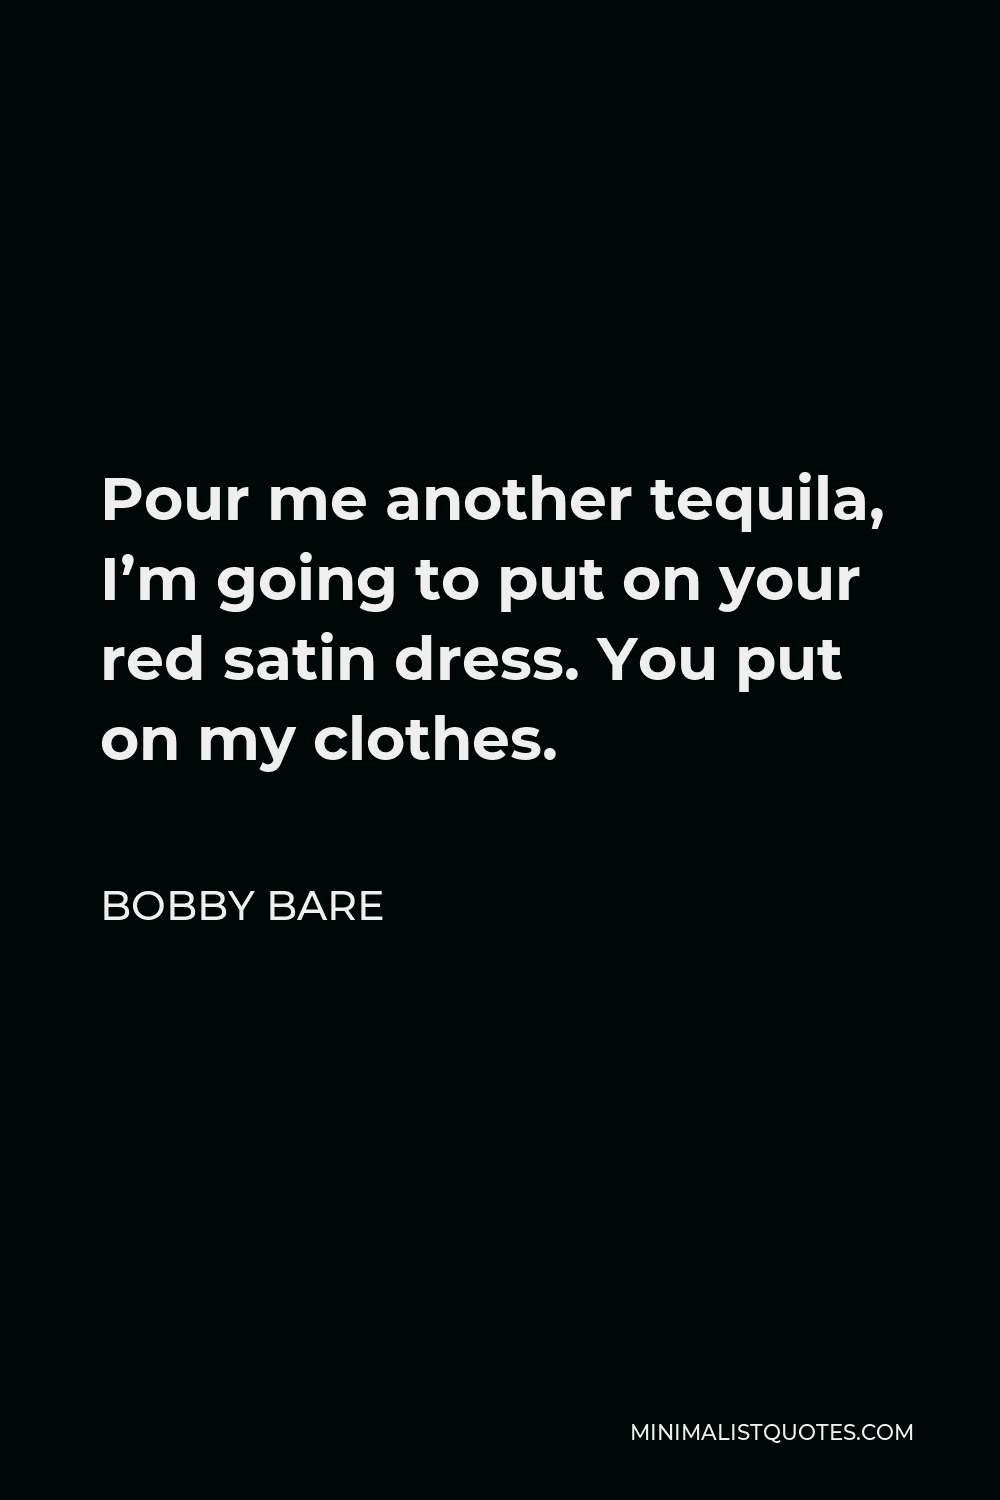 Bobby Bare Quote - Pour me another tequila, I’m going to put on your red satin dress. You put on my clothes.